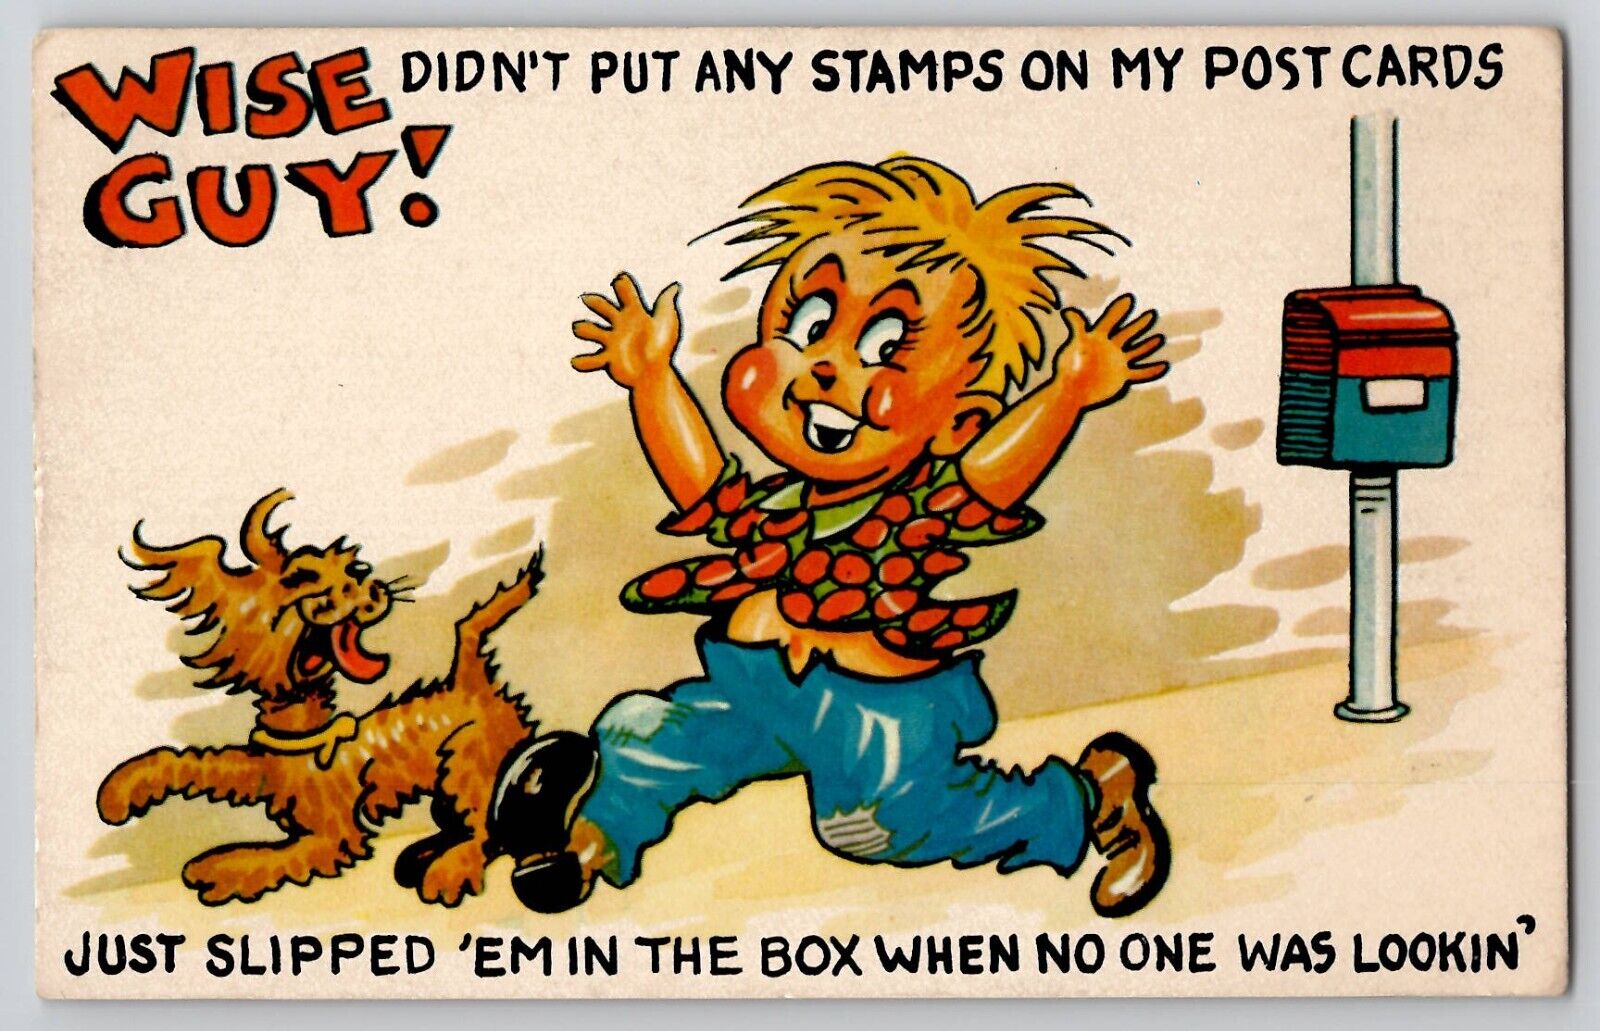 Missing Stamps Wise Guy Mailbox Humor Dog Little Boy Comic Chrome Postcard 1960s